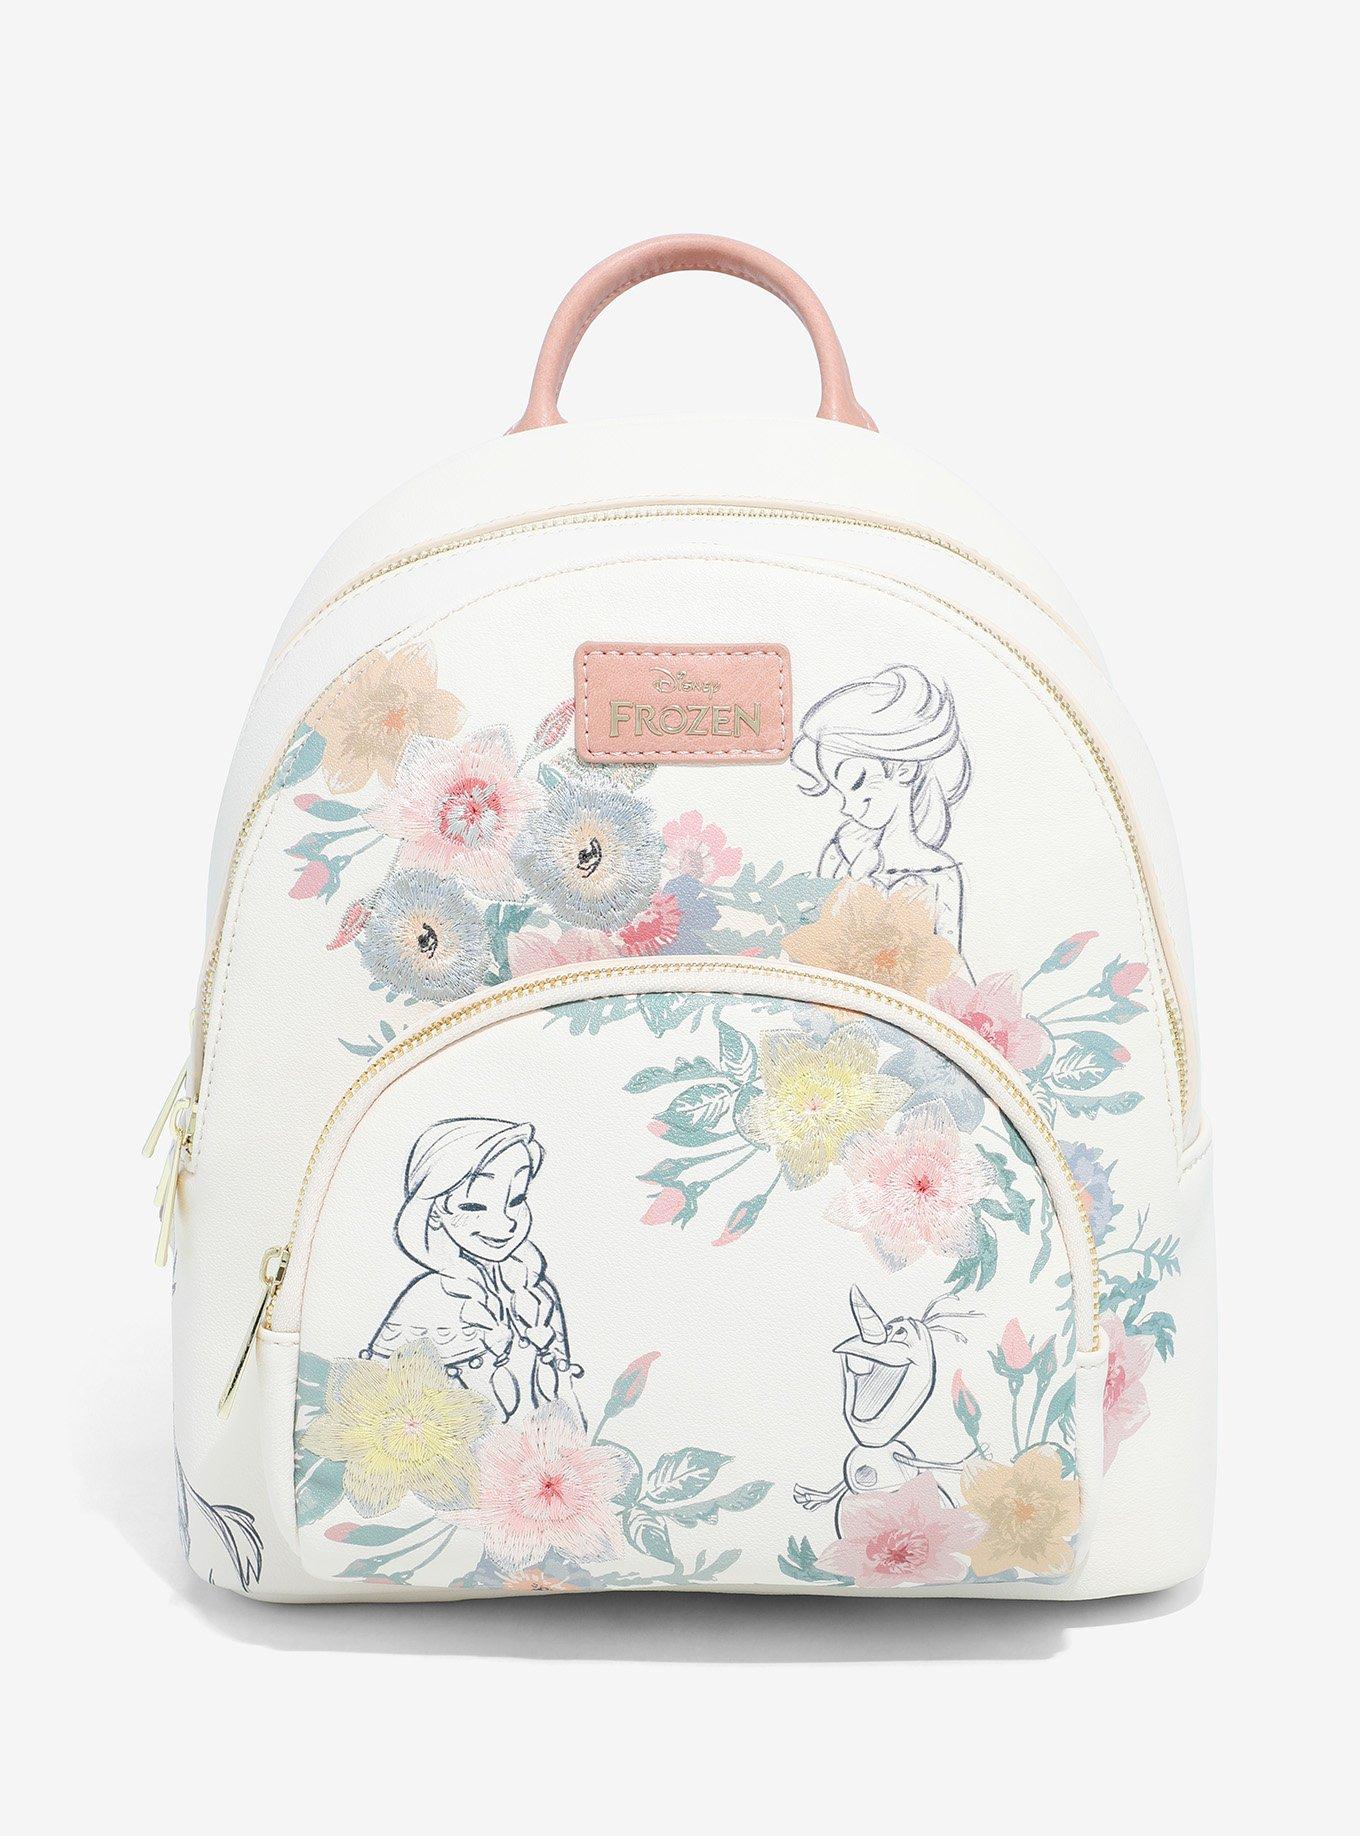 Loungefly Disney Princess Sketch Mini Backpack - BoxLunch Exclusive